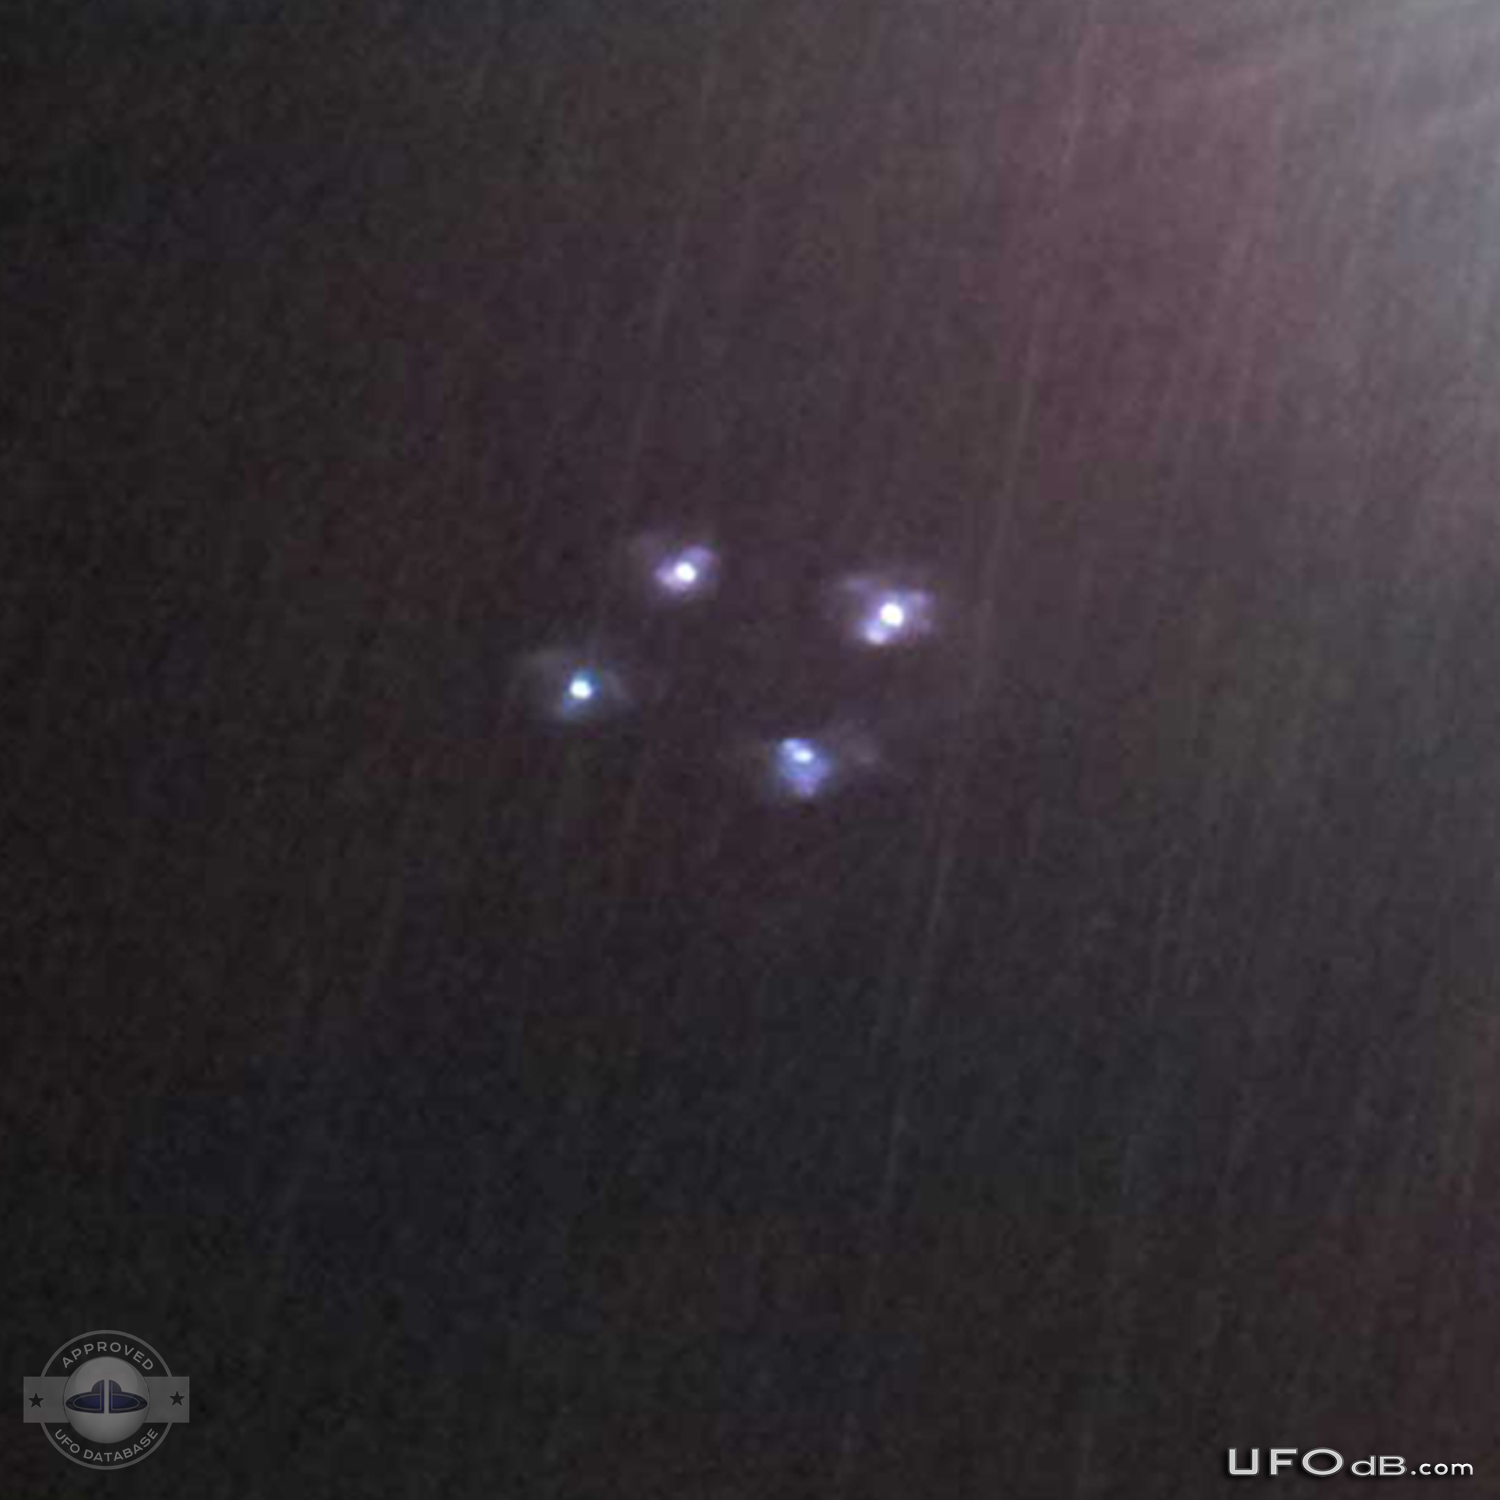 Square shaped UFO caught on picture during heavy rainfall - Rialto CA UFO Picture #384-3